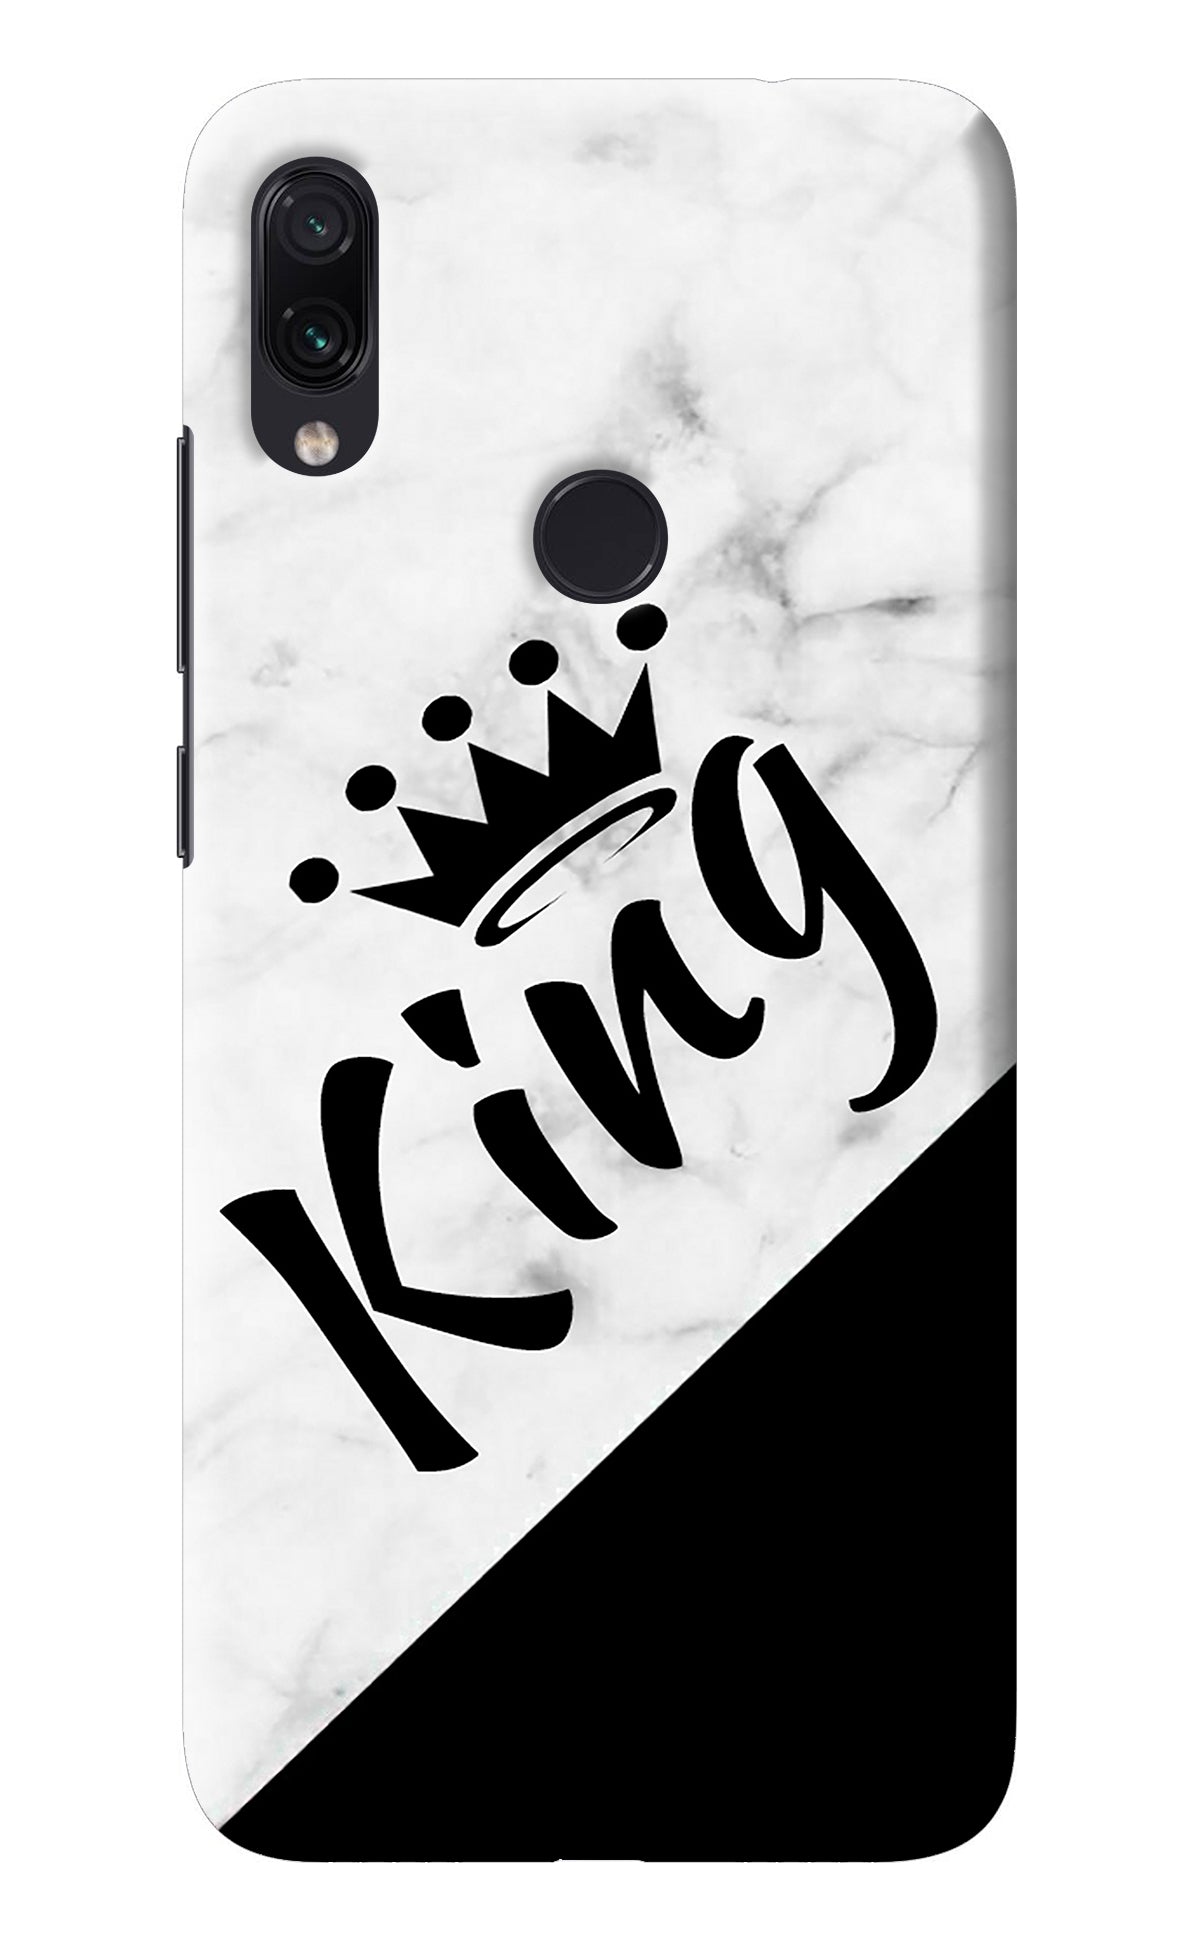 King Redmi Note 7/7S/7 Pro Back Cover